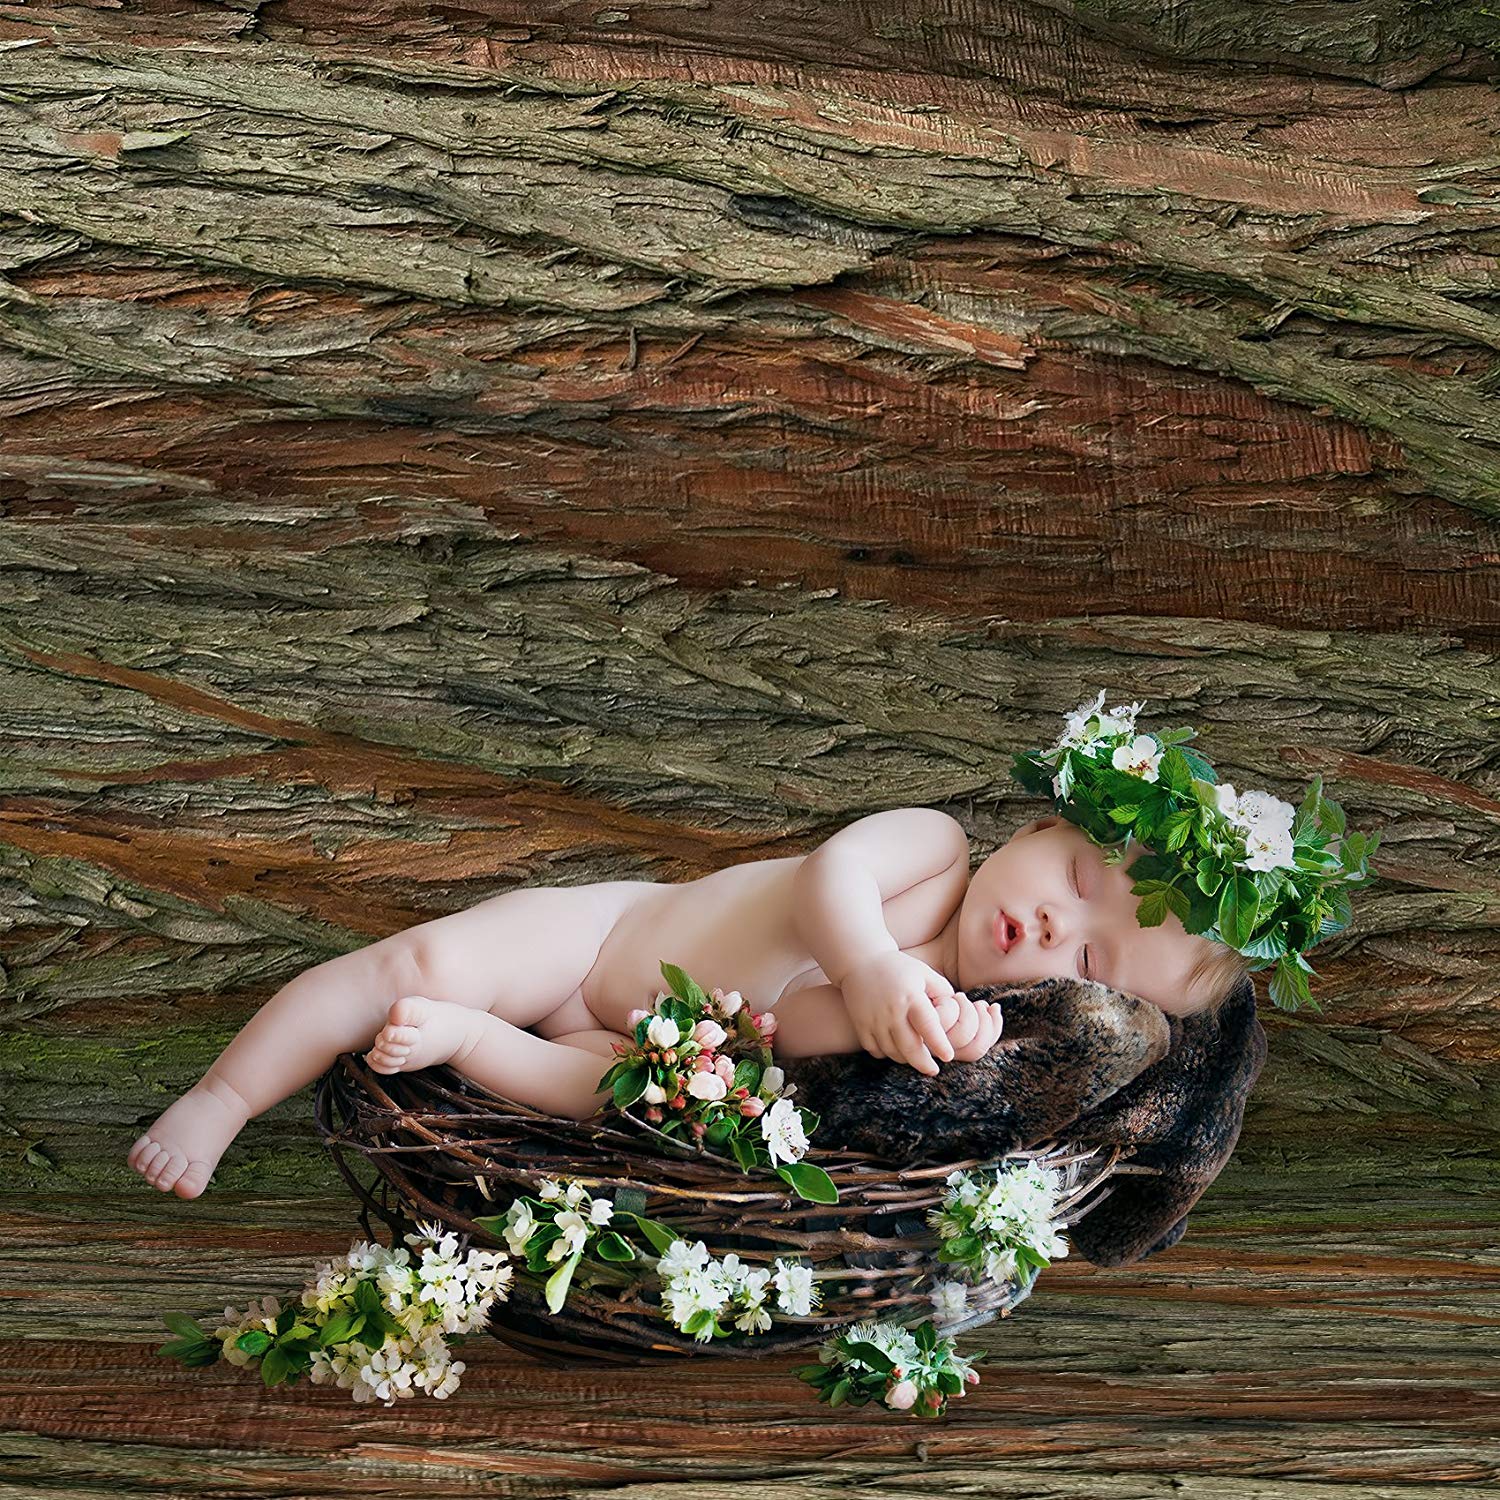 Rustic Distressed Wood Backdrop Photography Background #1784 Tree With Moss